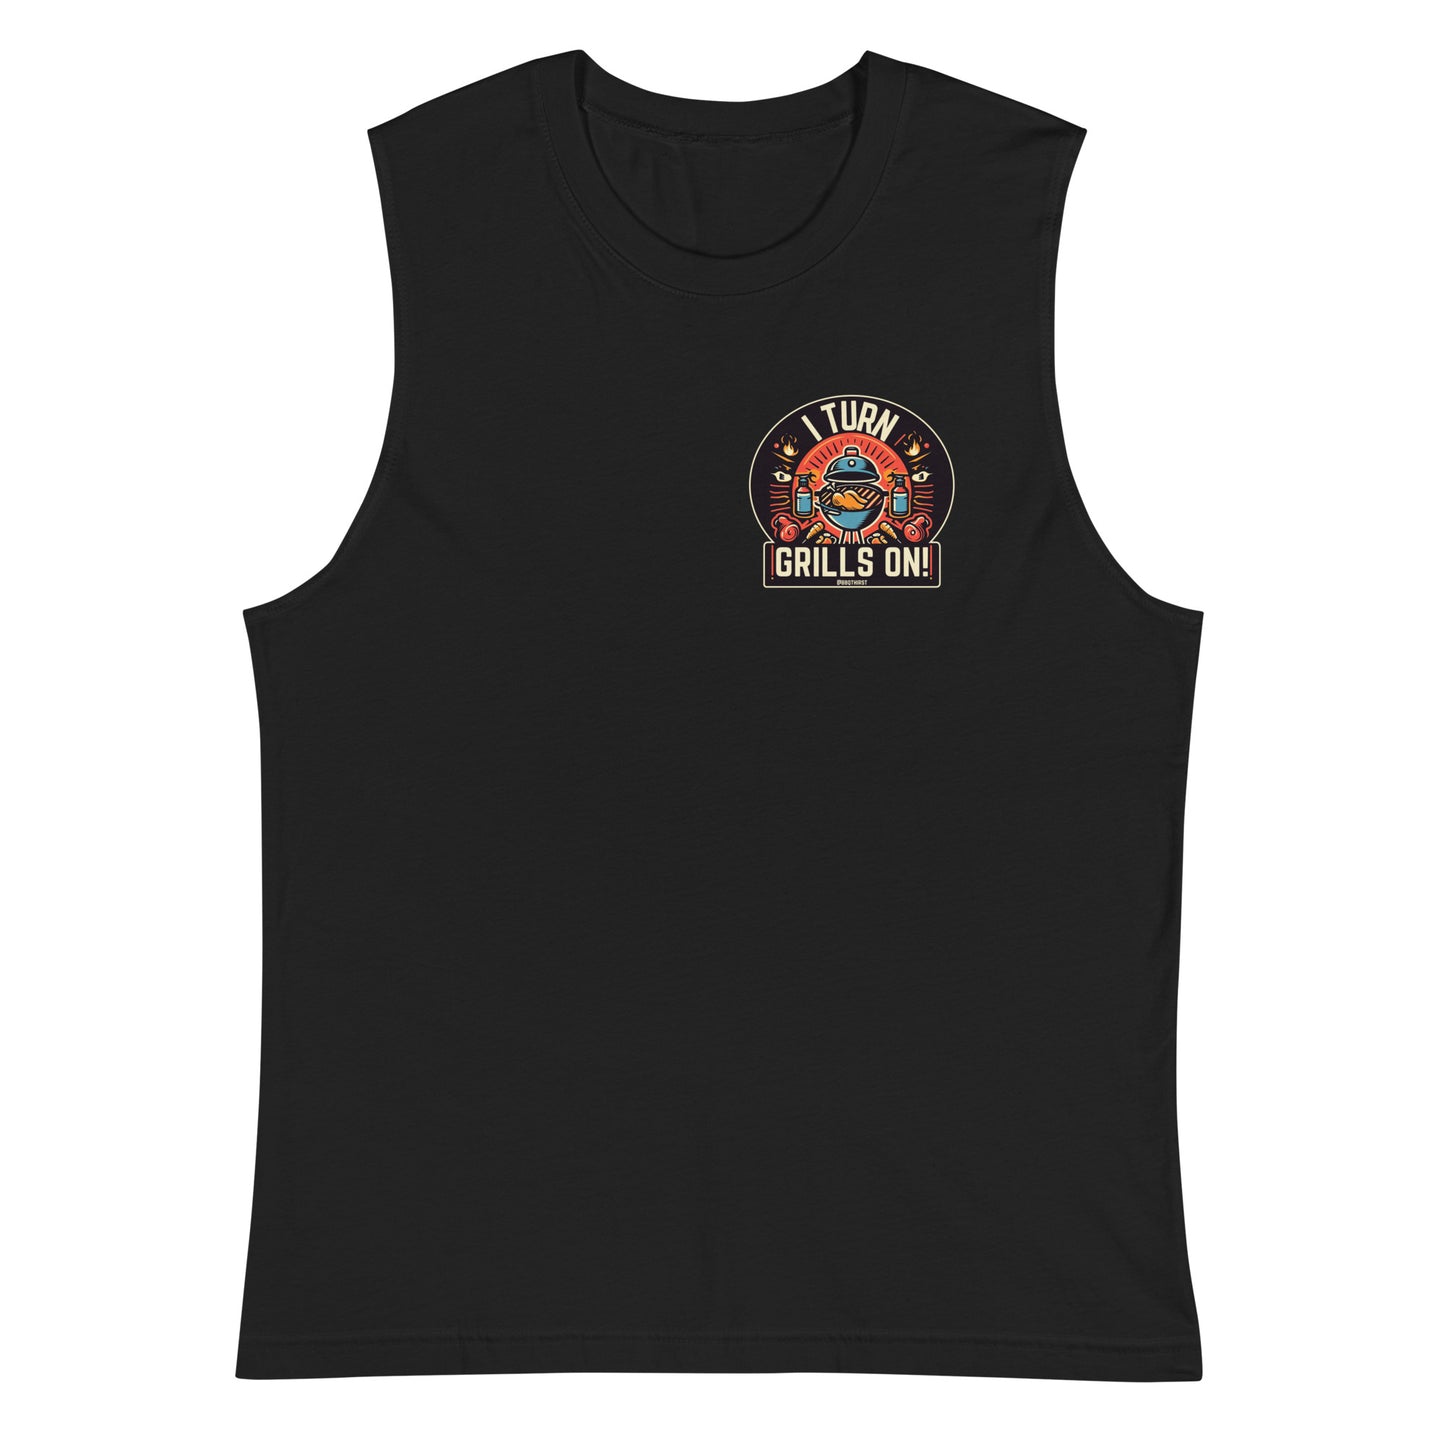 Grills On! Muscle Tee